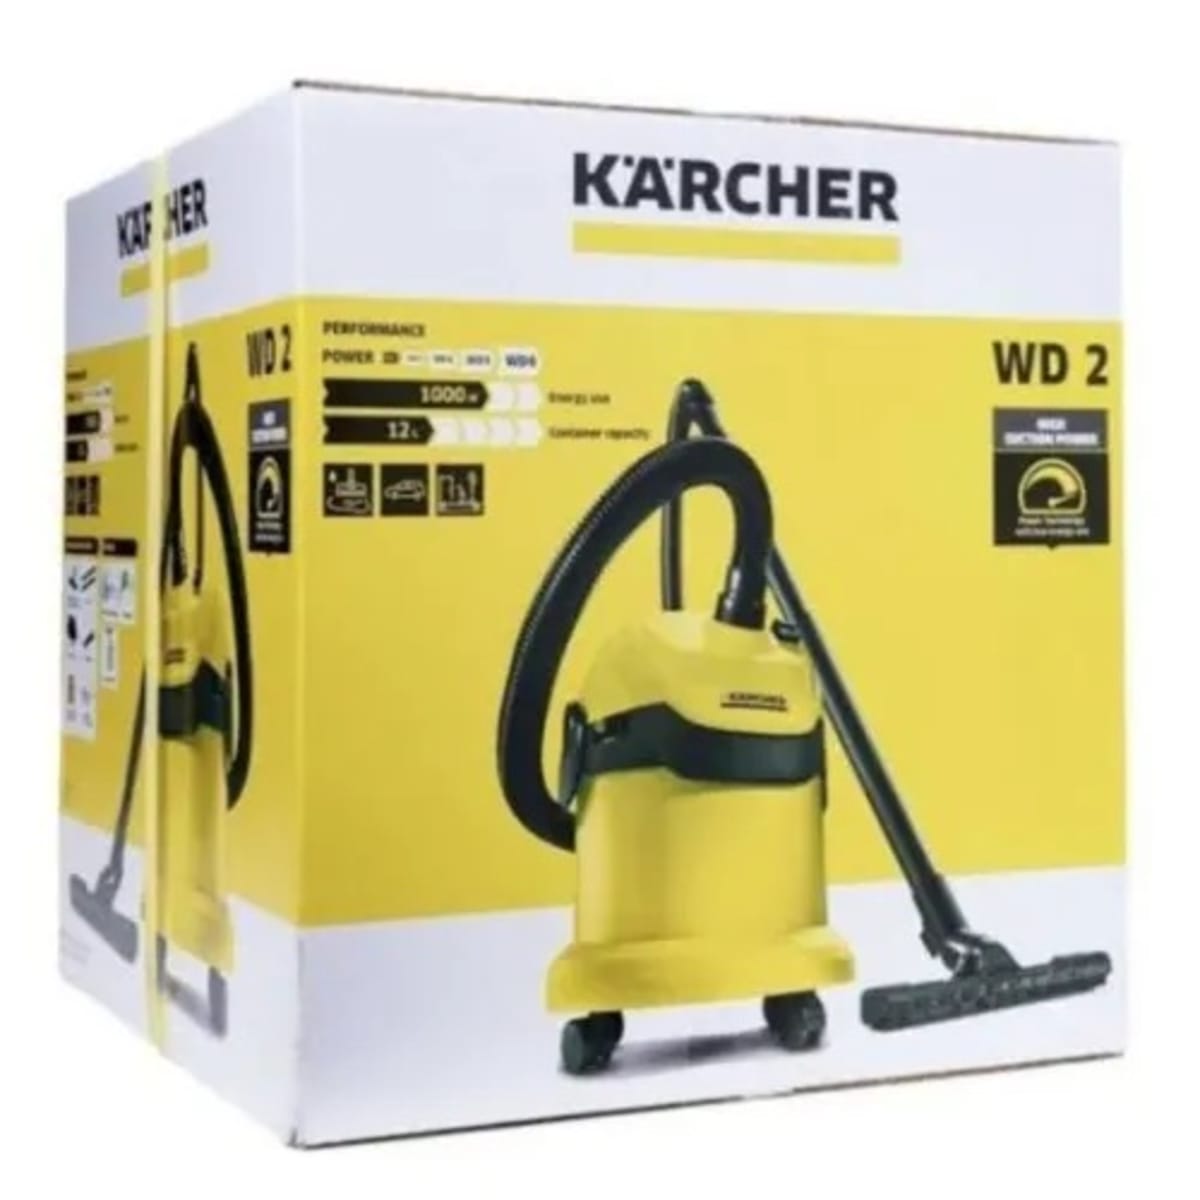 Karcher Wd2 Wet And Dry Vacuum Cleaner - 1000W